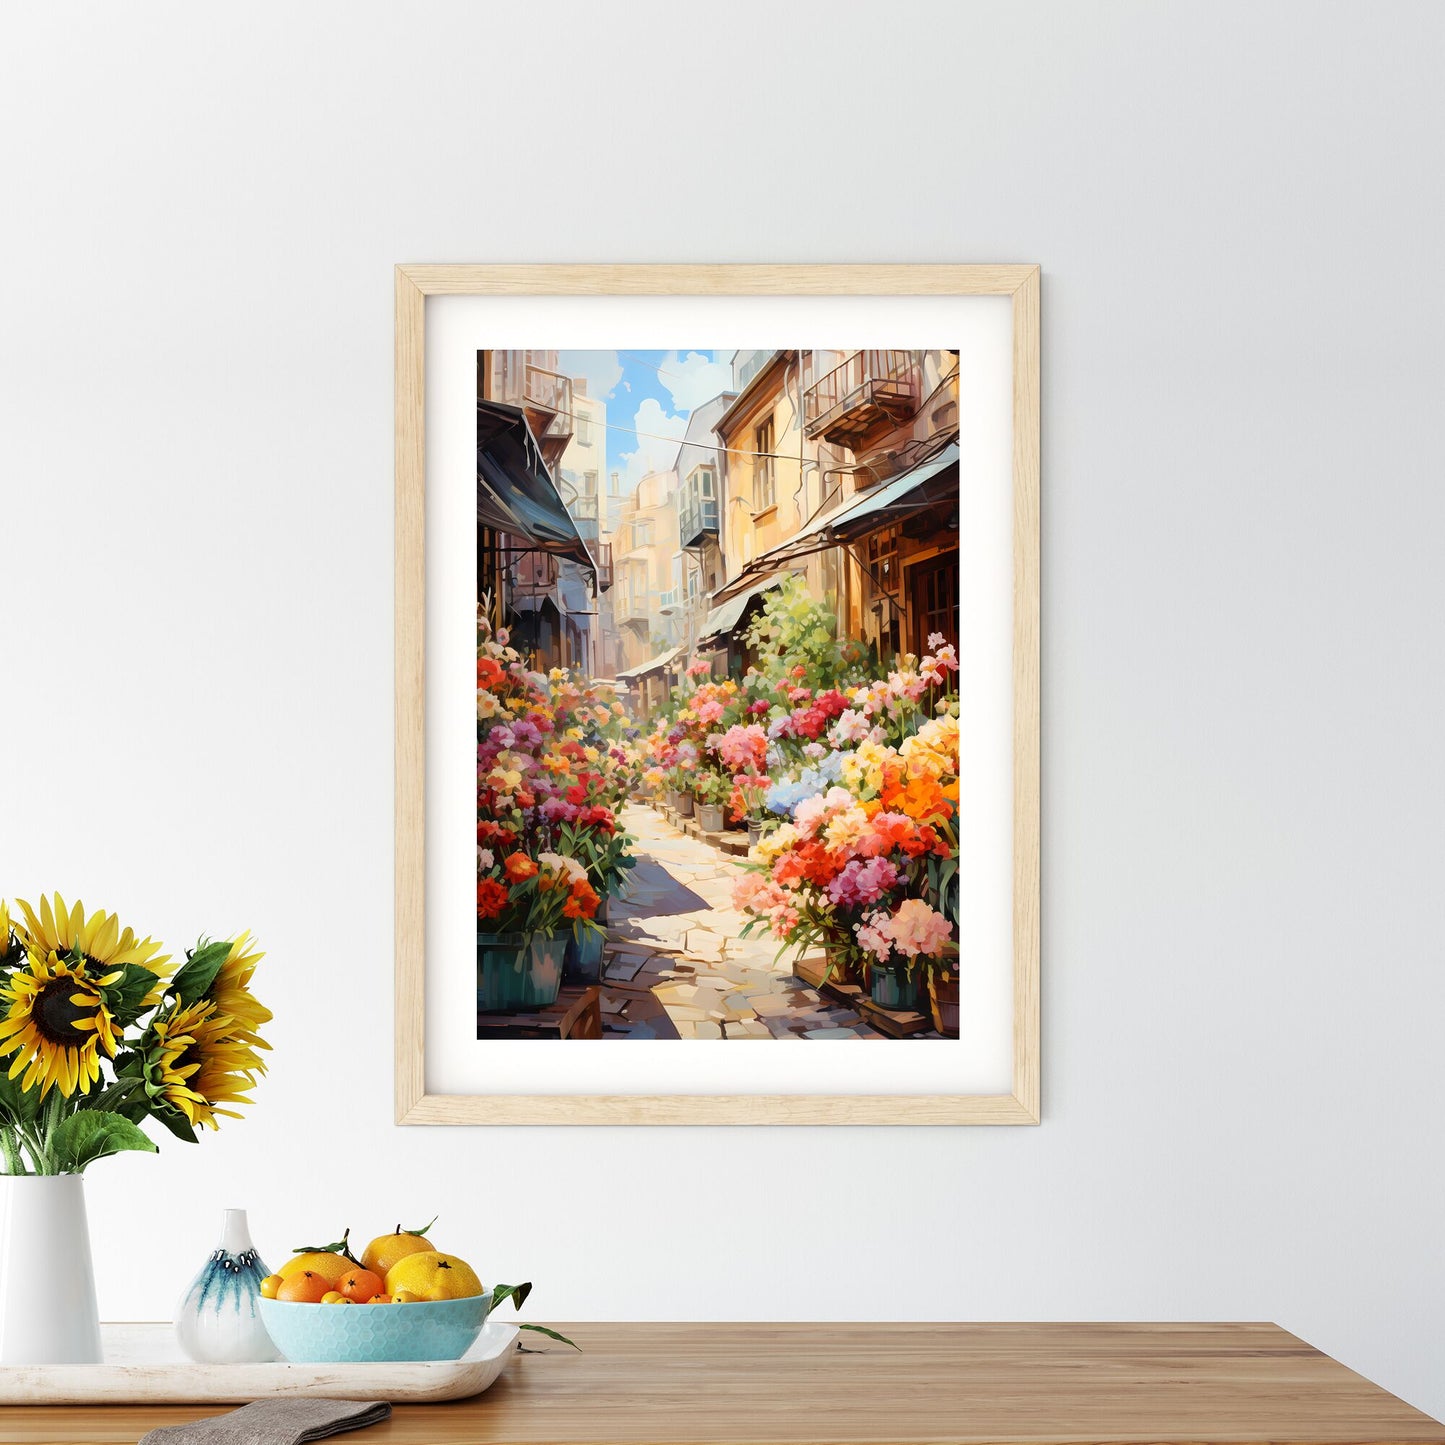 Street With Flowers In Pots Art Print Default Title